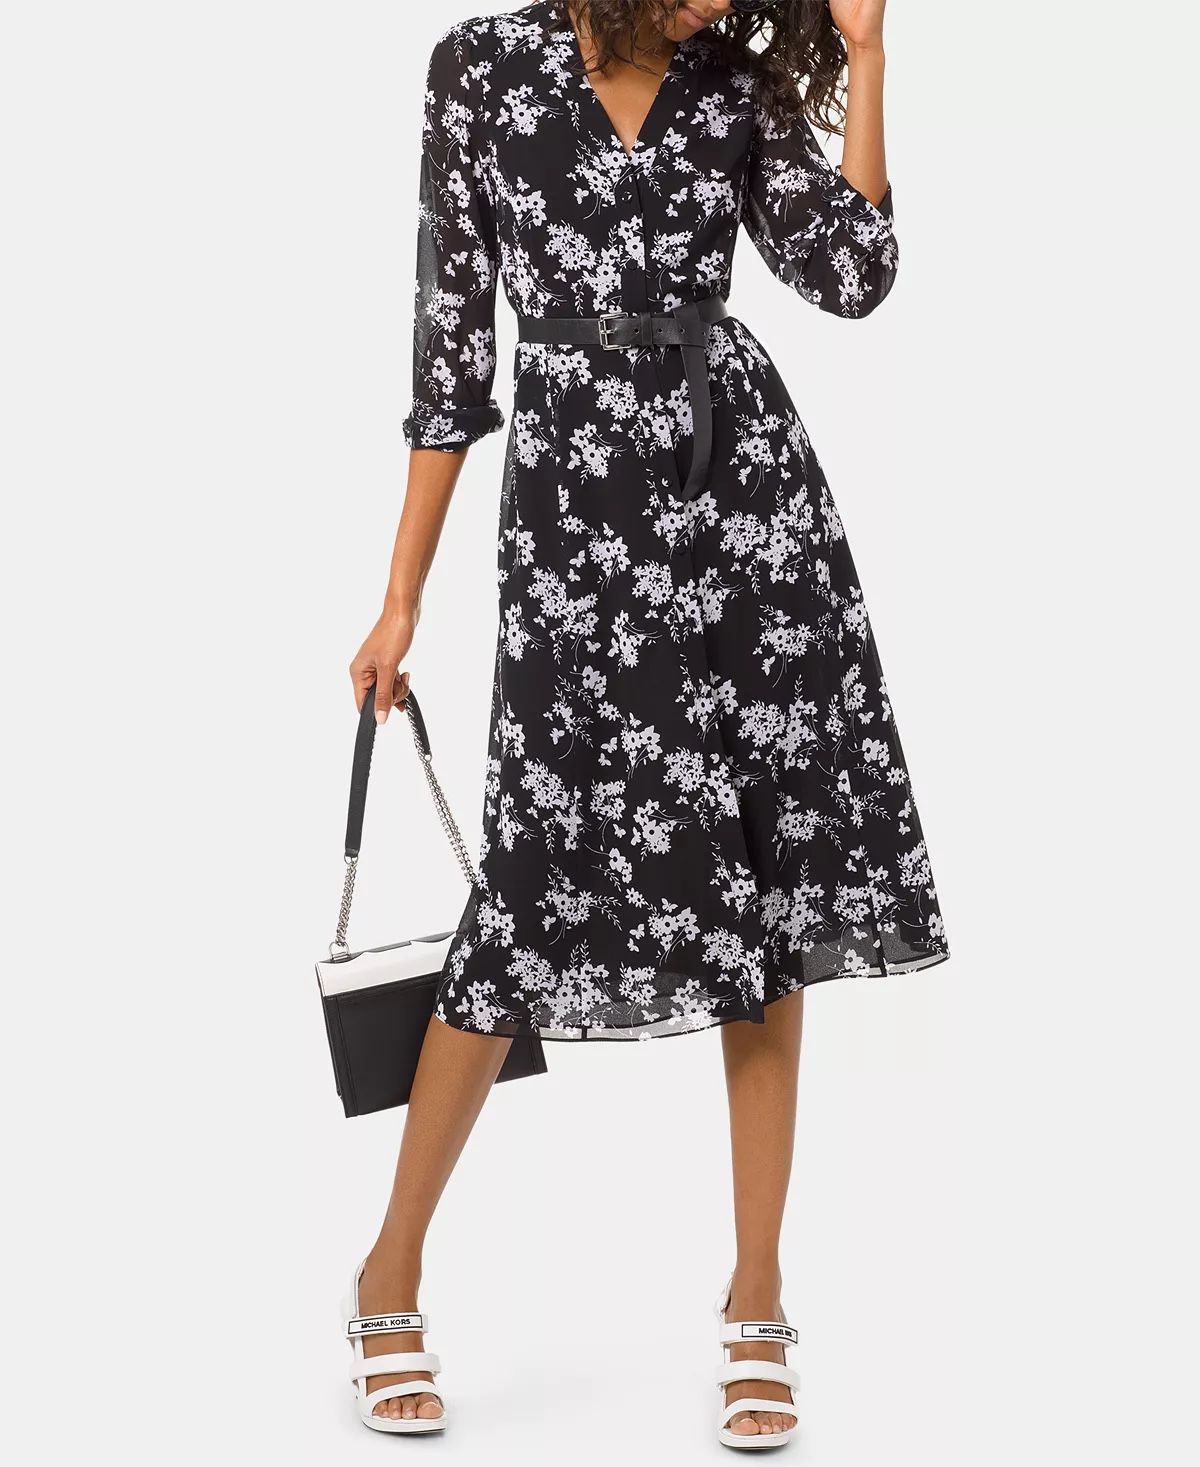 Dress Michael Kors Black and White Floral Belted Midi XS